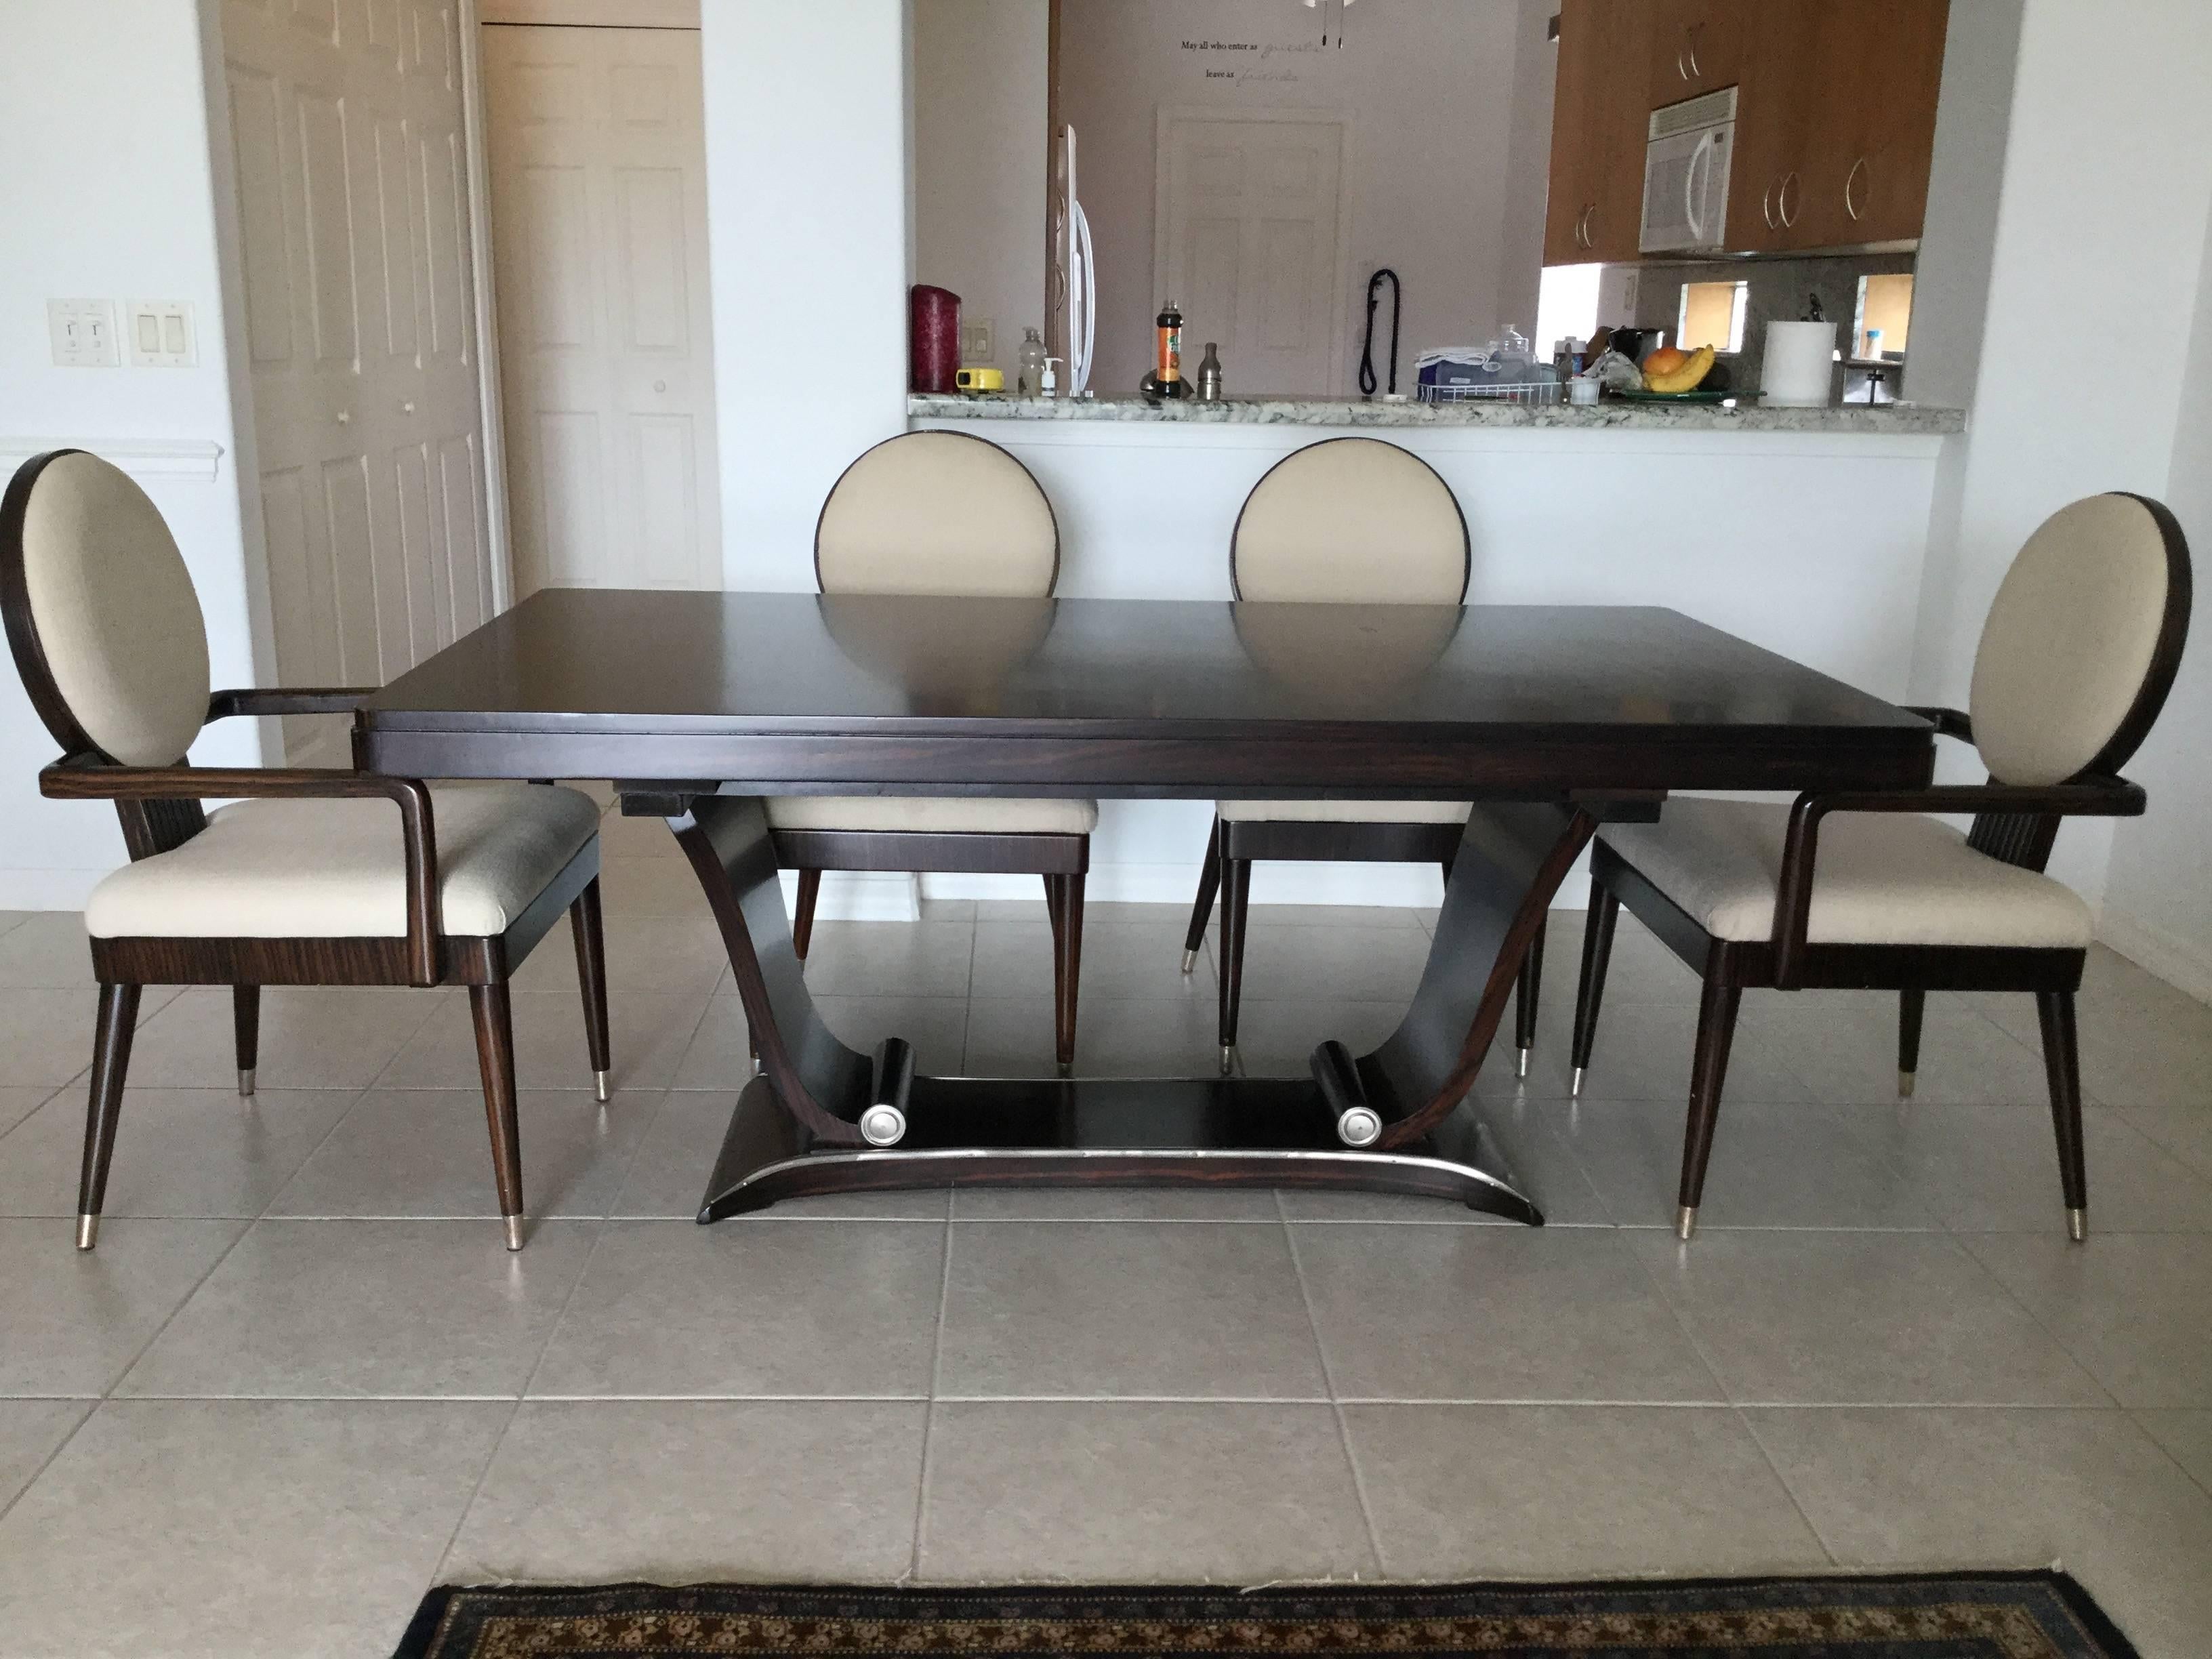 A magnificent modern rosewood dining table having a stylish curved pedestal base with two scroll shaped elements adorned with silver metal banding.
Six very chic matching chairs accompany the table, two arm, four side, having chic square seats